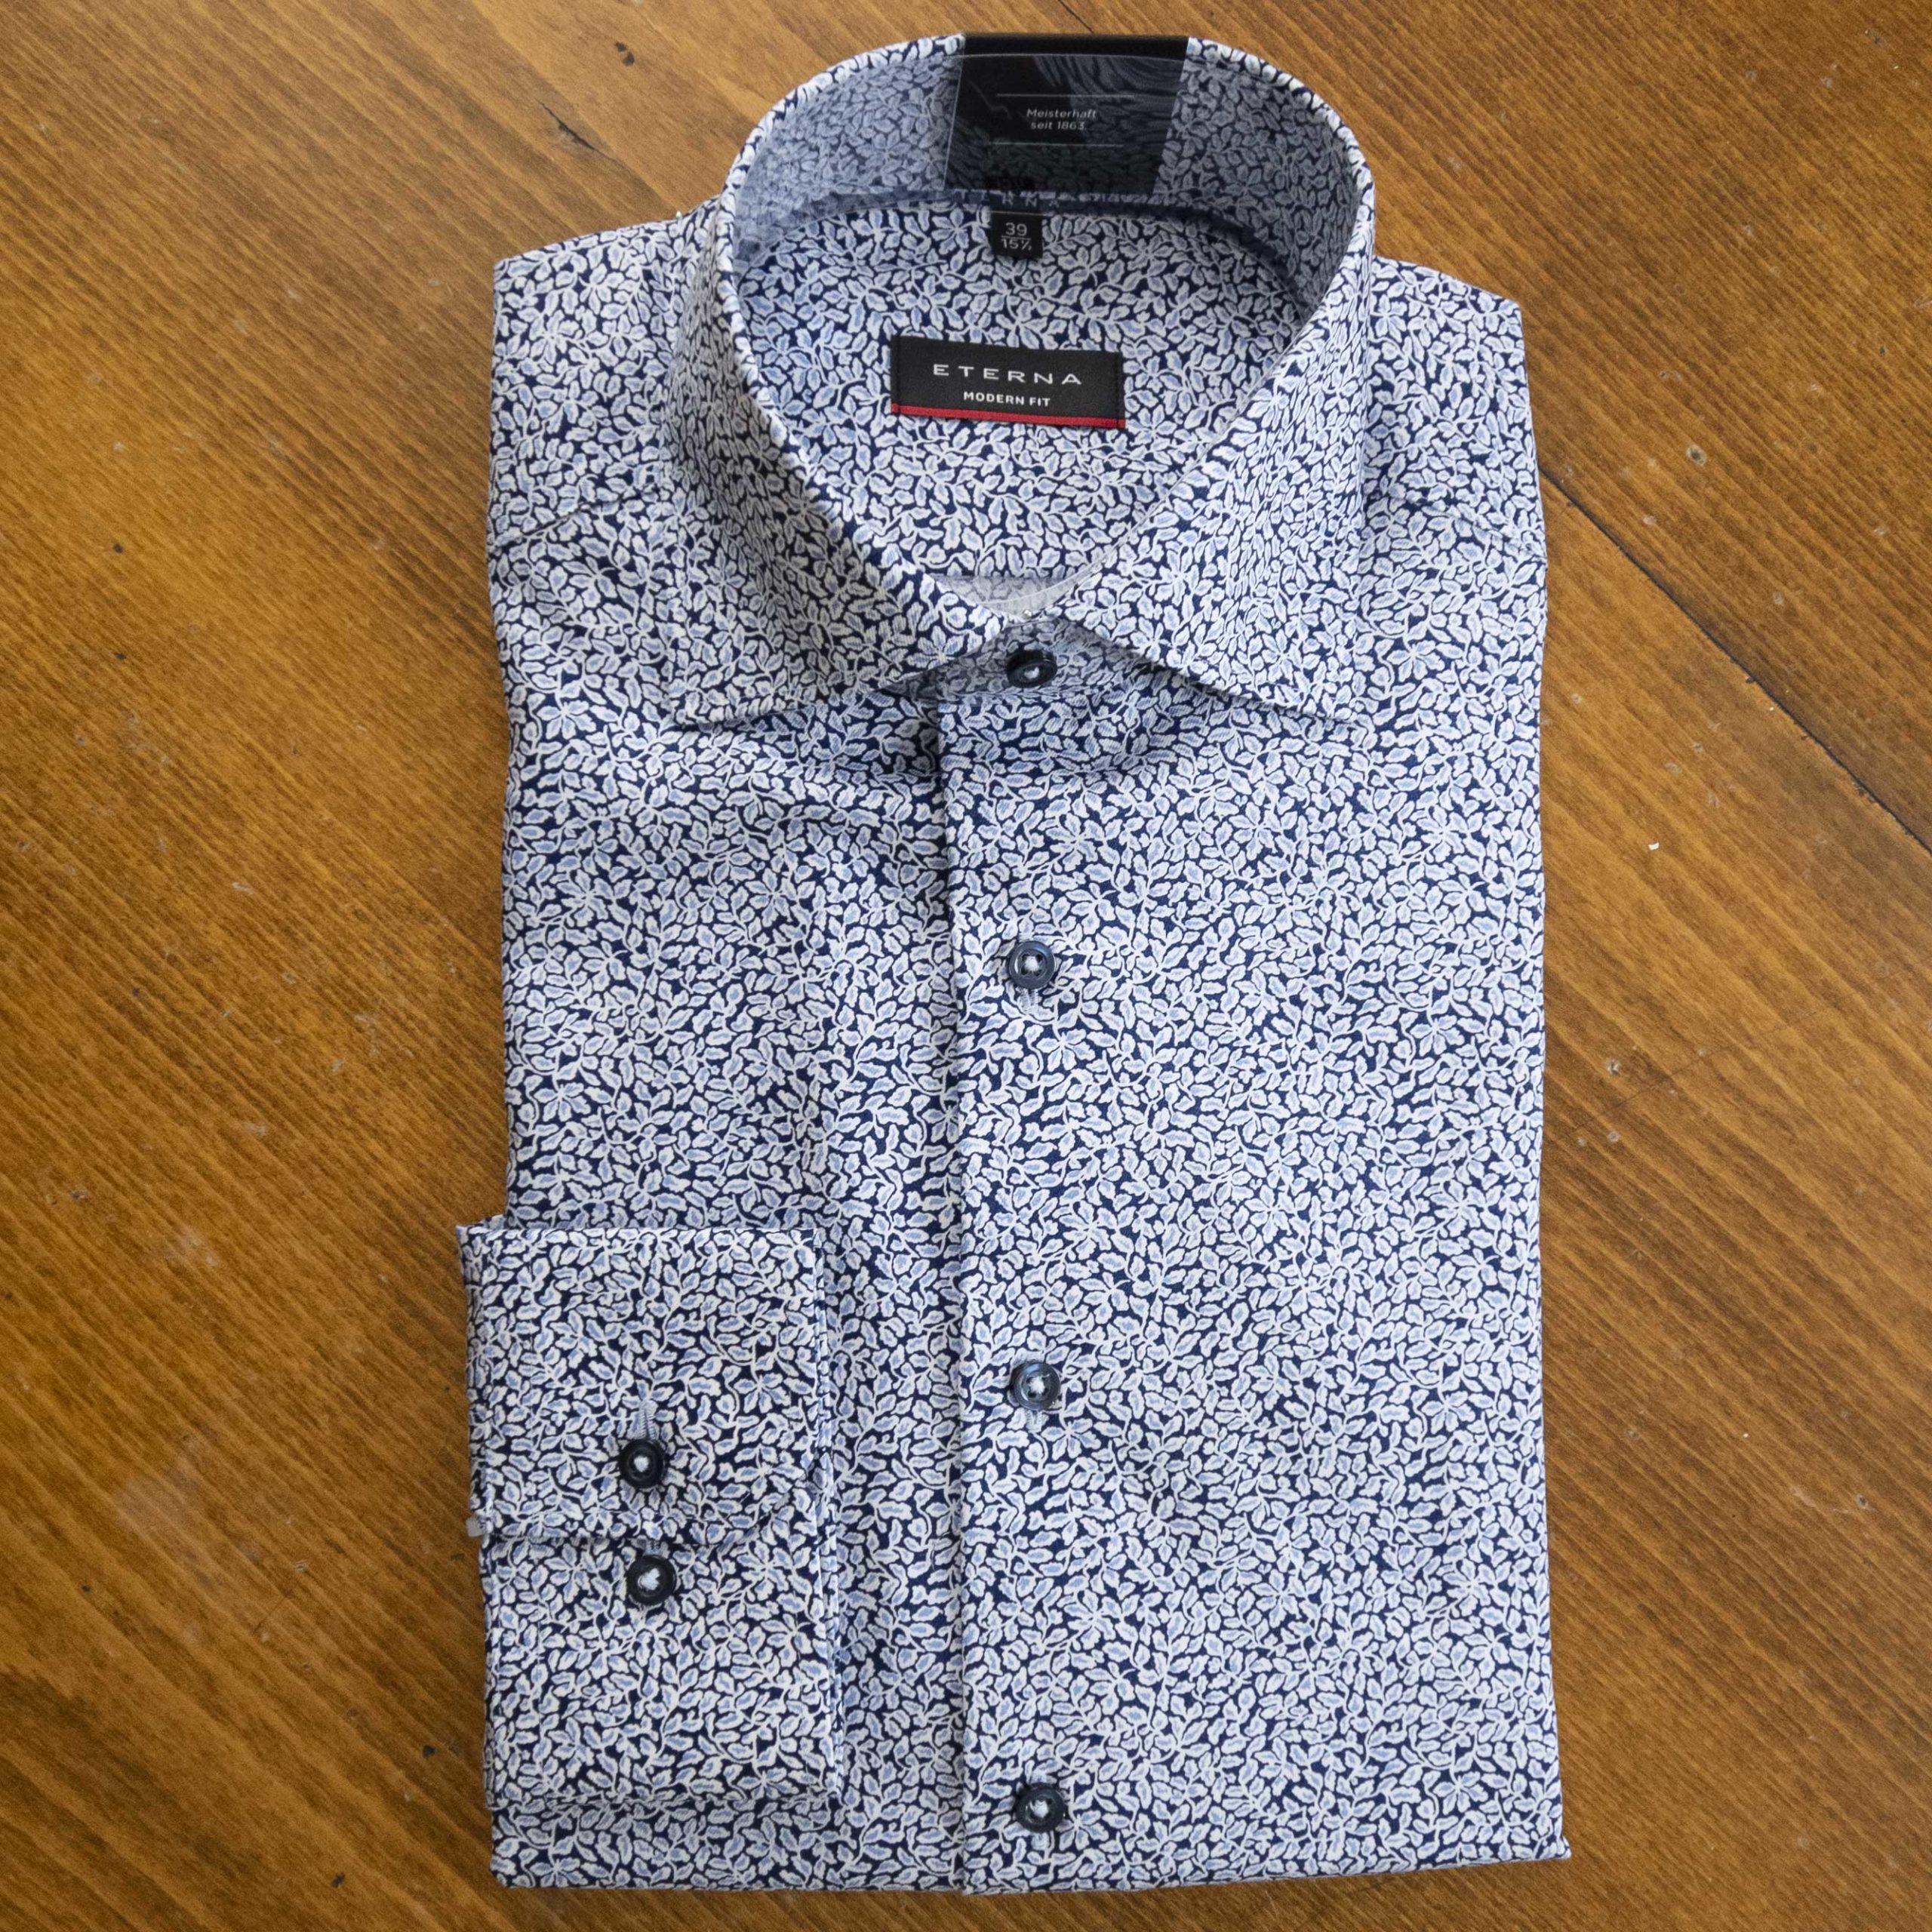 Eterna shirt with tiny grey and white leaves on navy - Gabucci Menswear ...